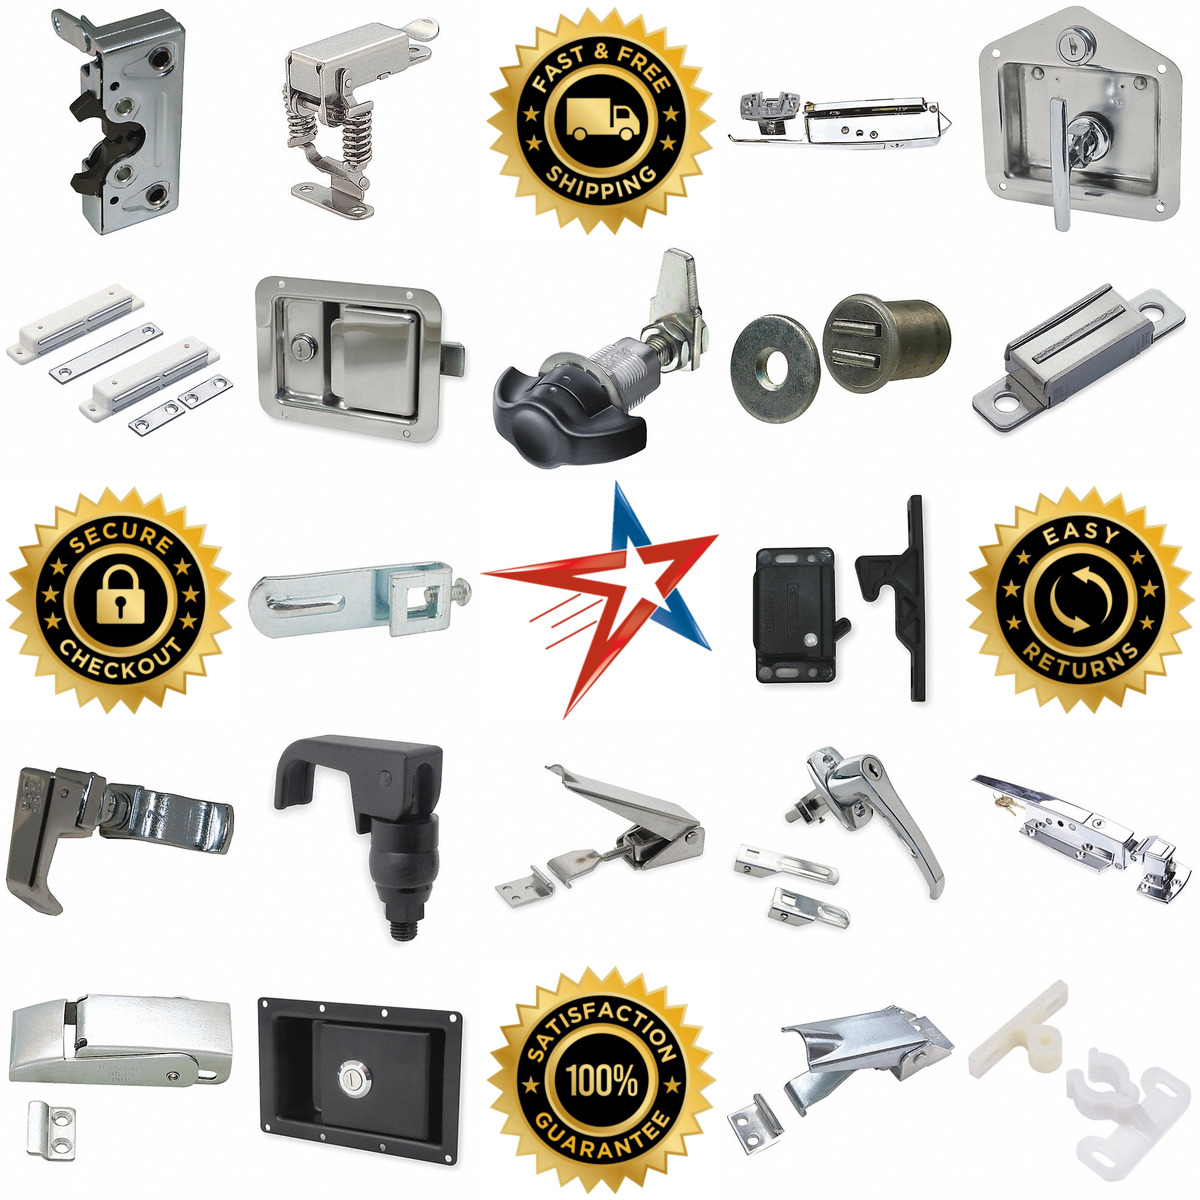 A selection of Catches and Latches products on GoVets